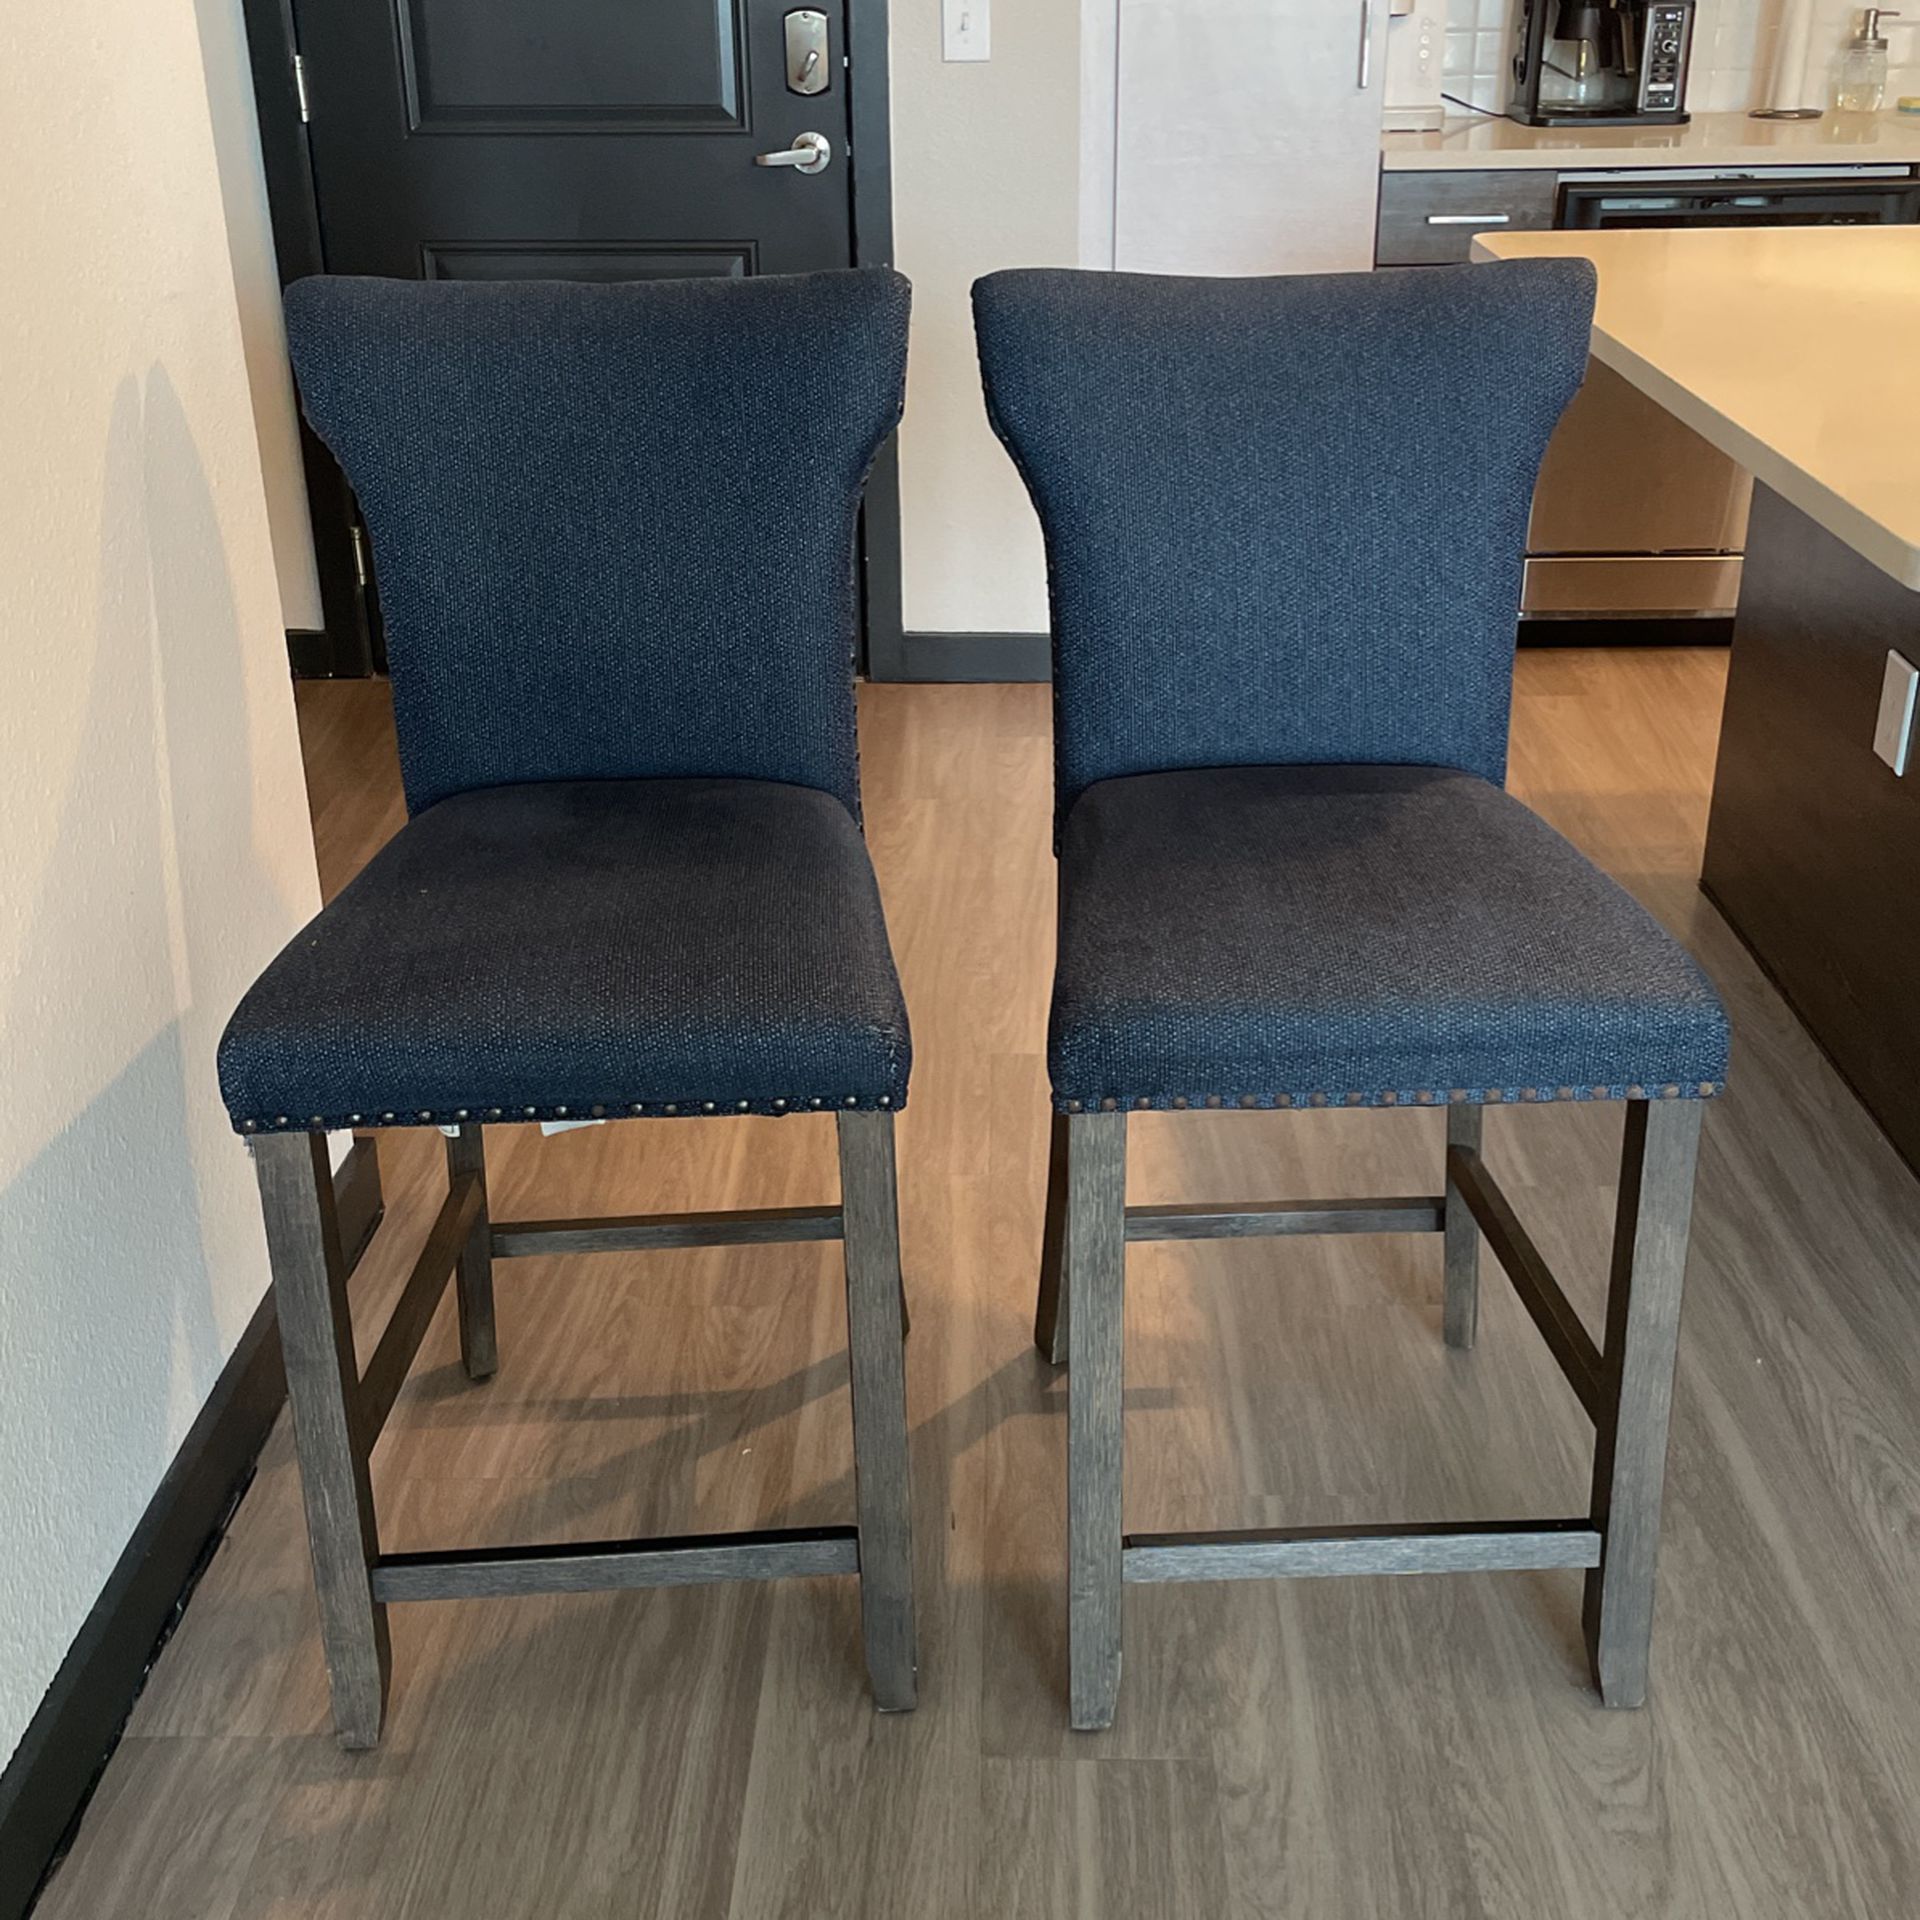 Pair Of Barstools Good Condition 